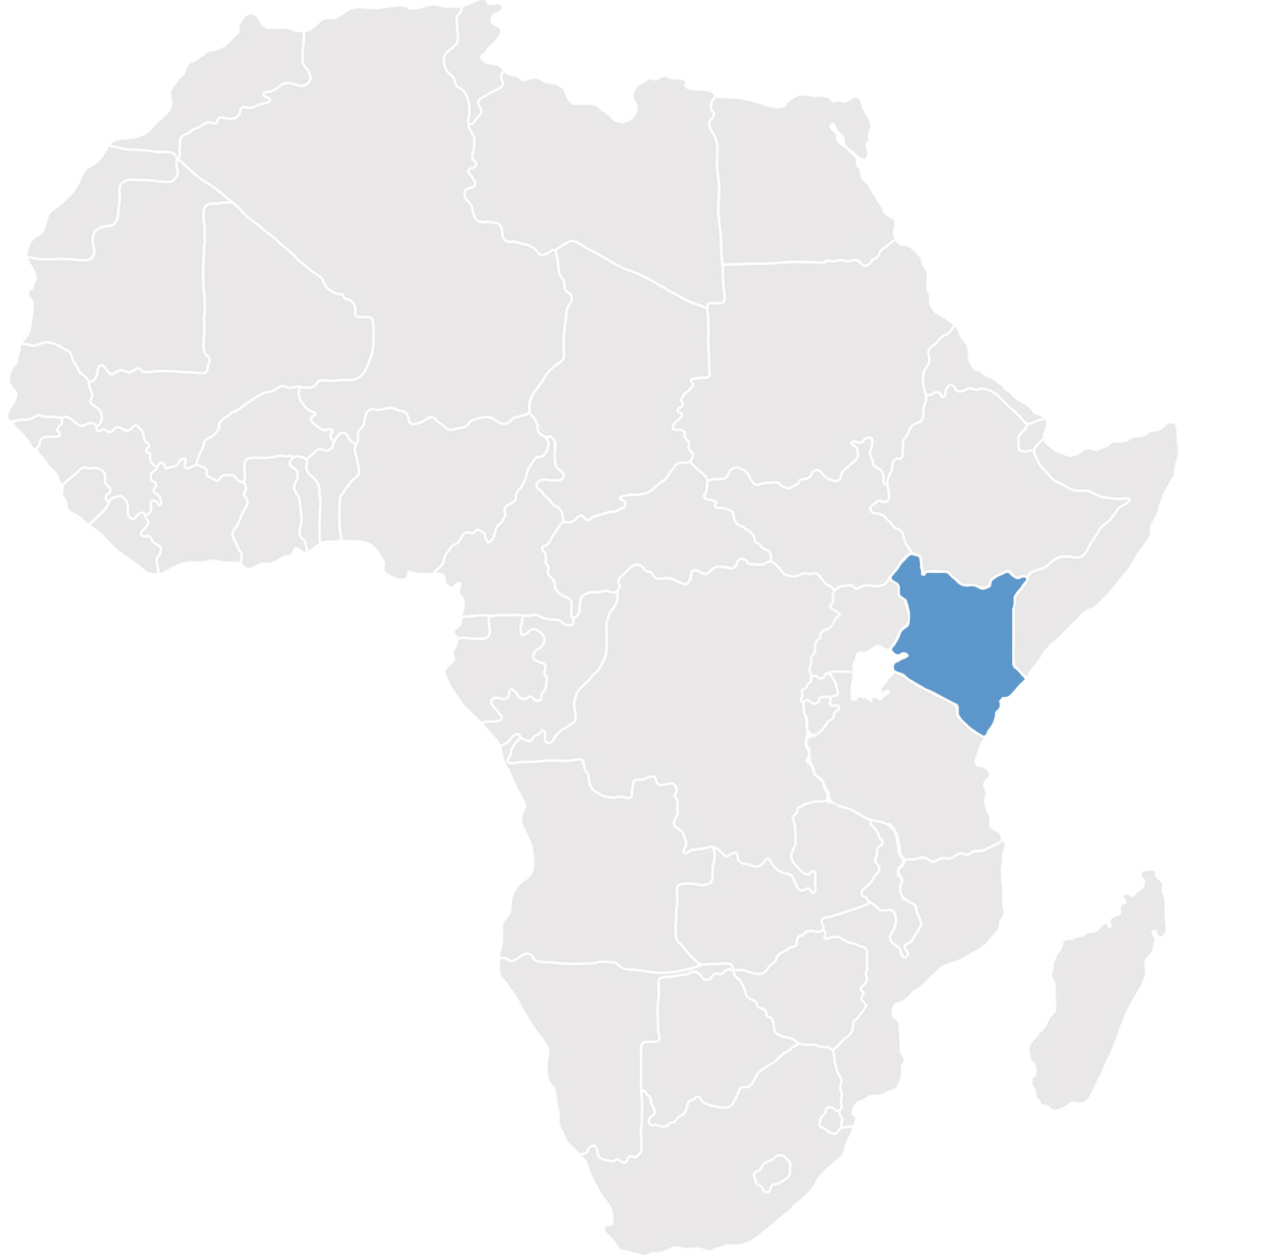 Gray map of Africa with Kenya in blue